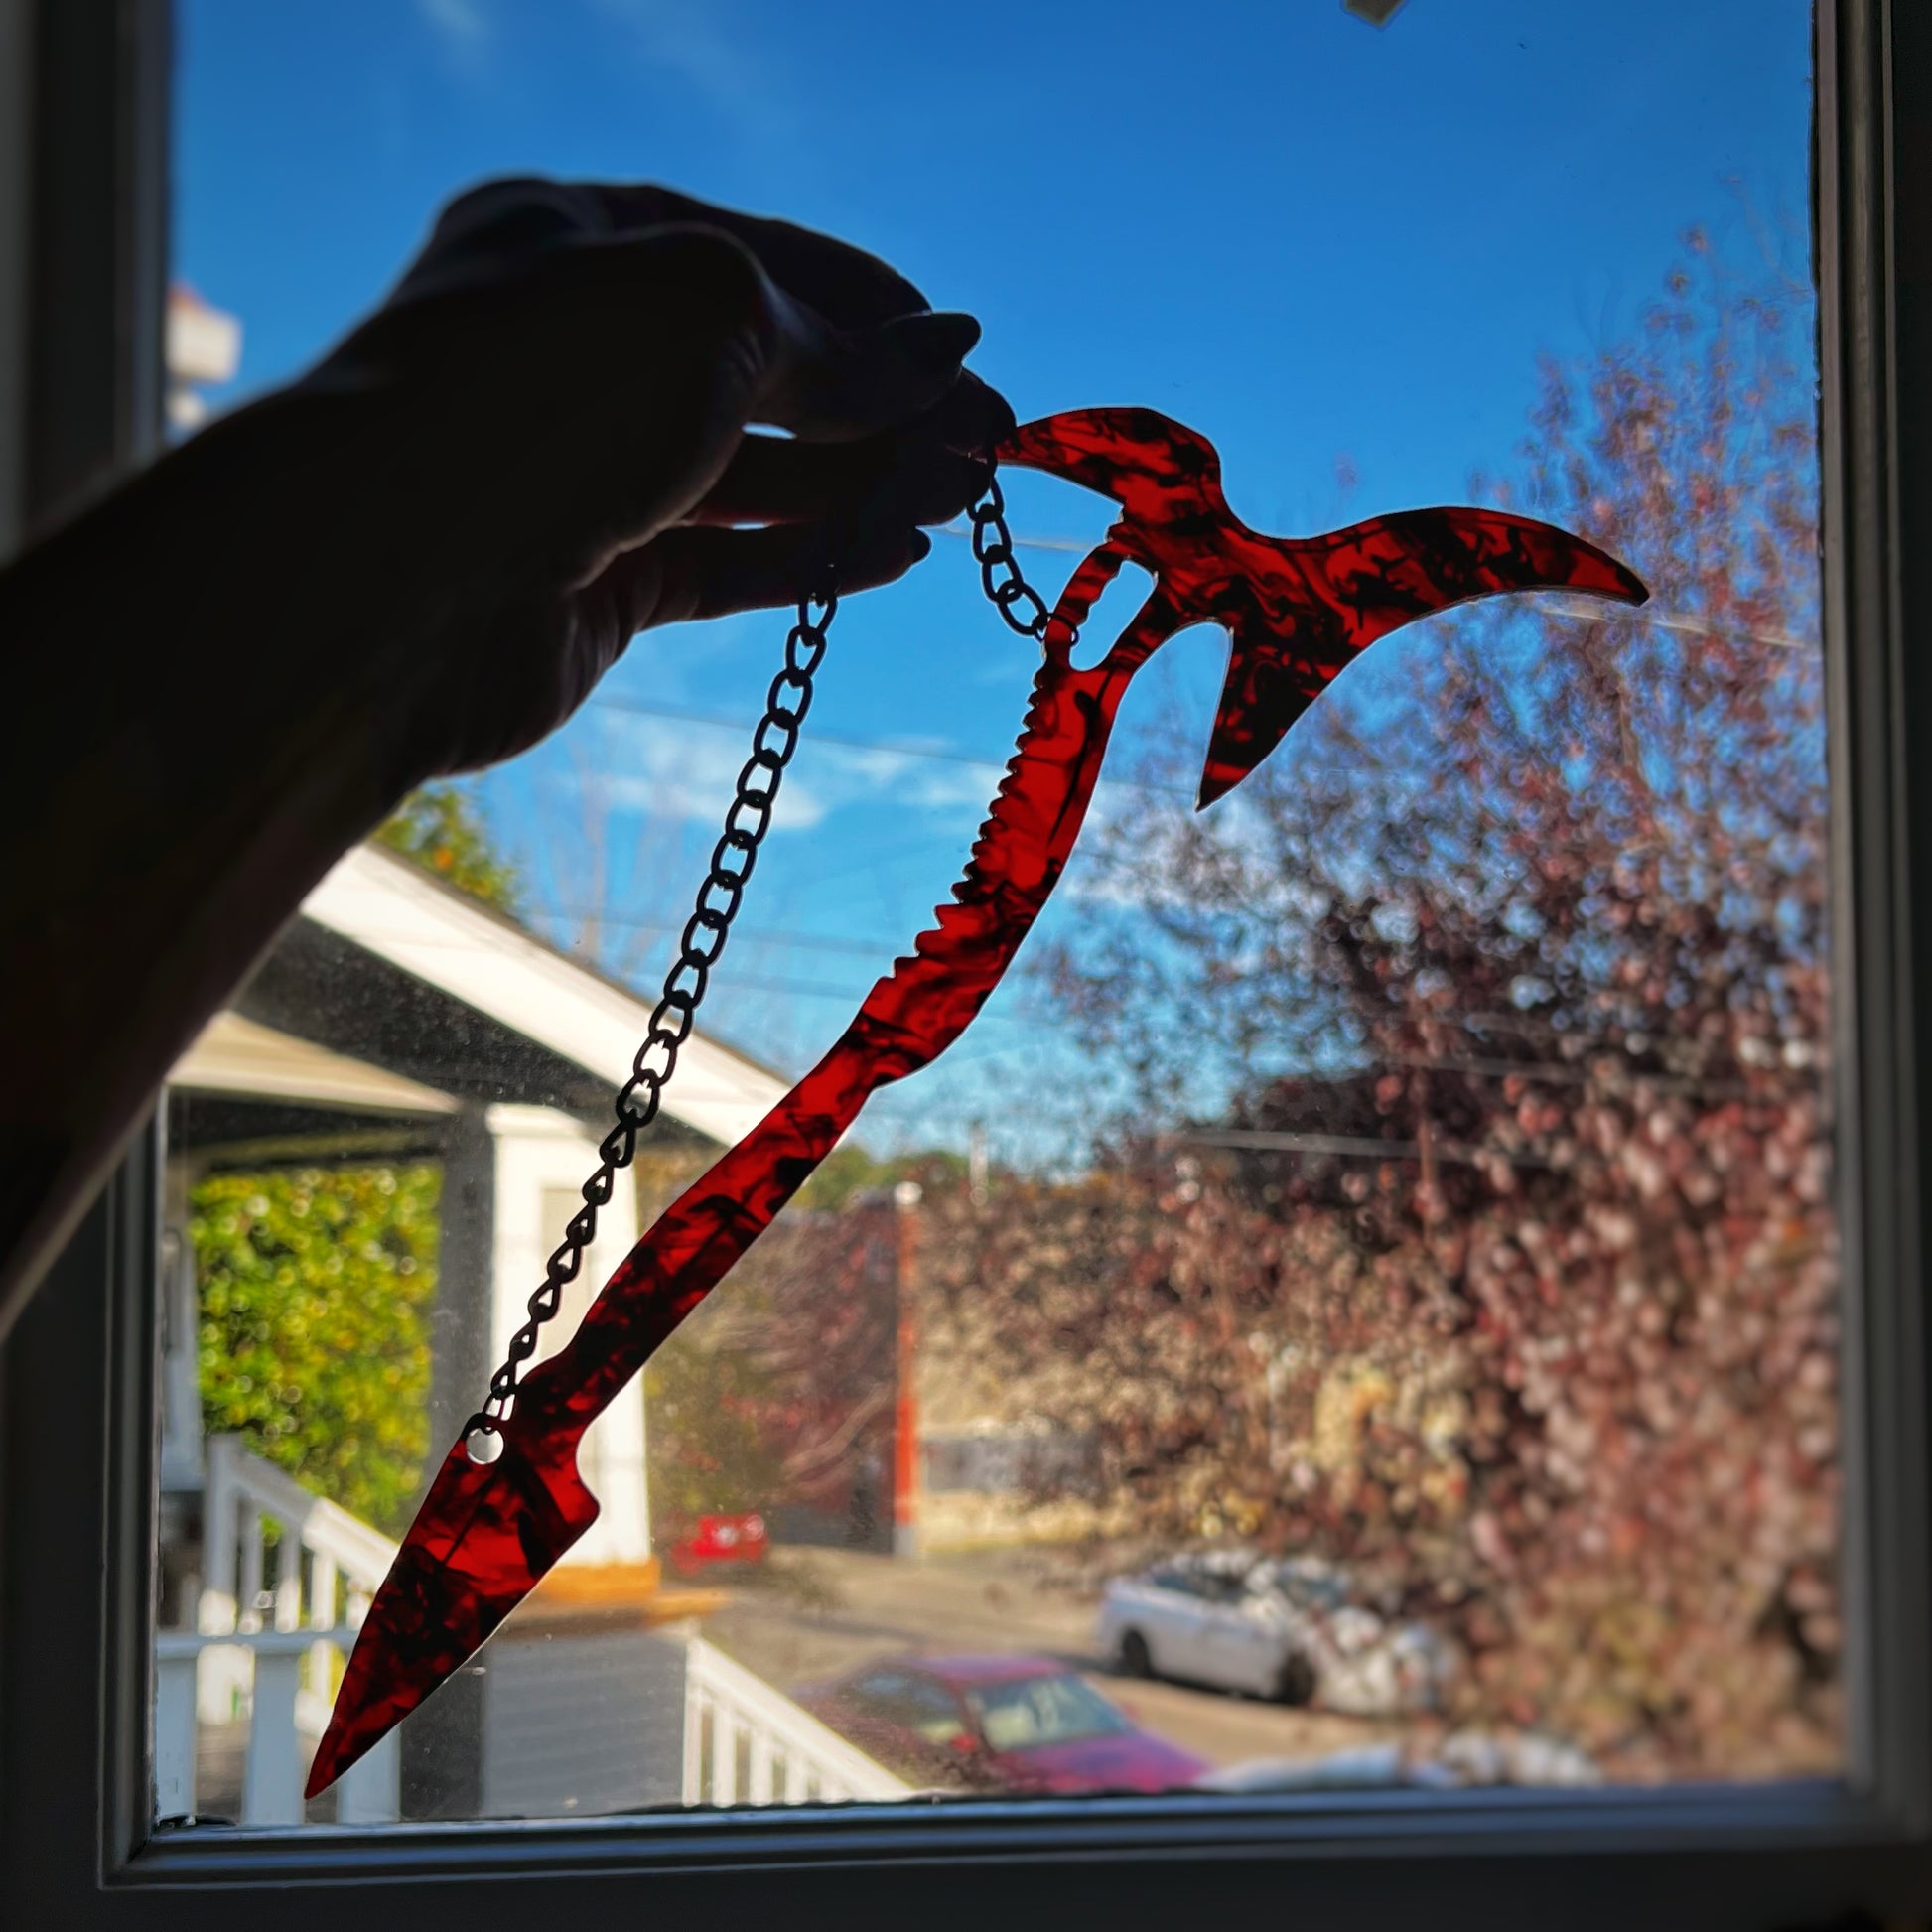 Mandy Movie Merch - A Replica of the weapon from the film, called "The Beast". Large red and black swirled syth-axe hybrid hanging from a black chain.